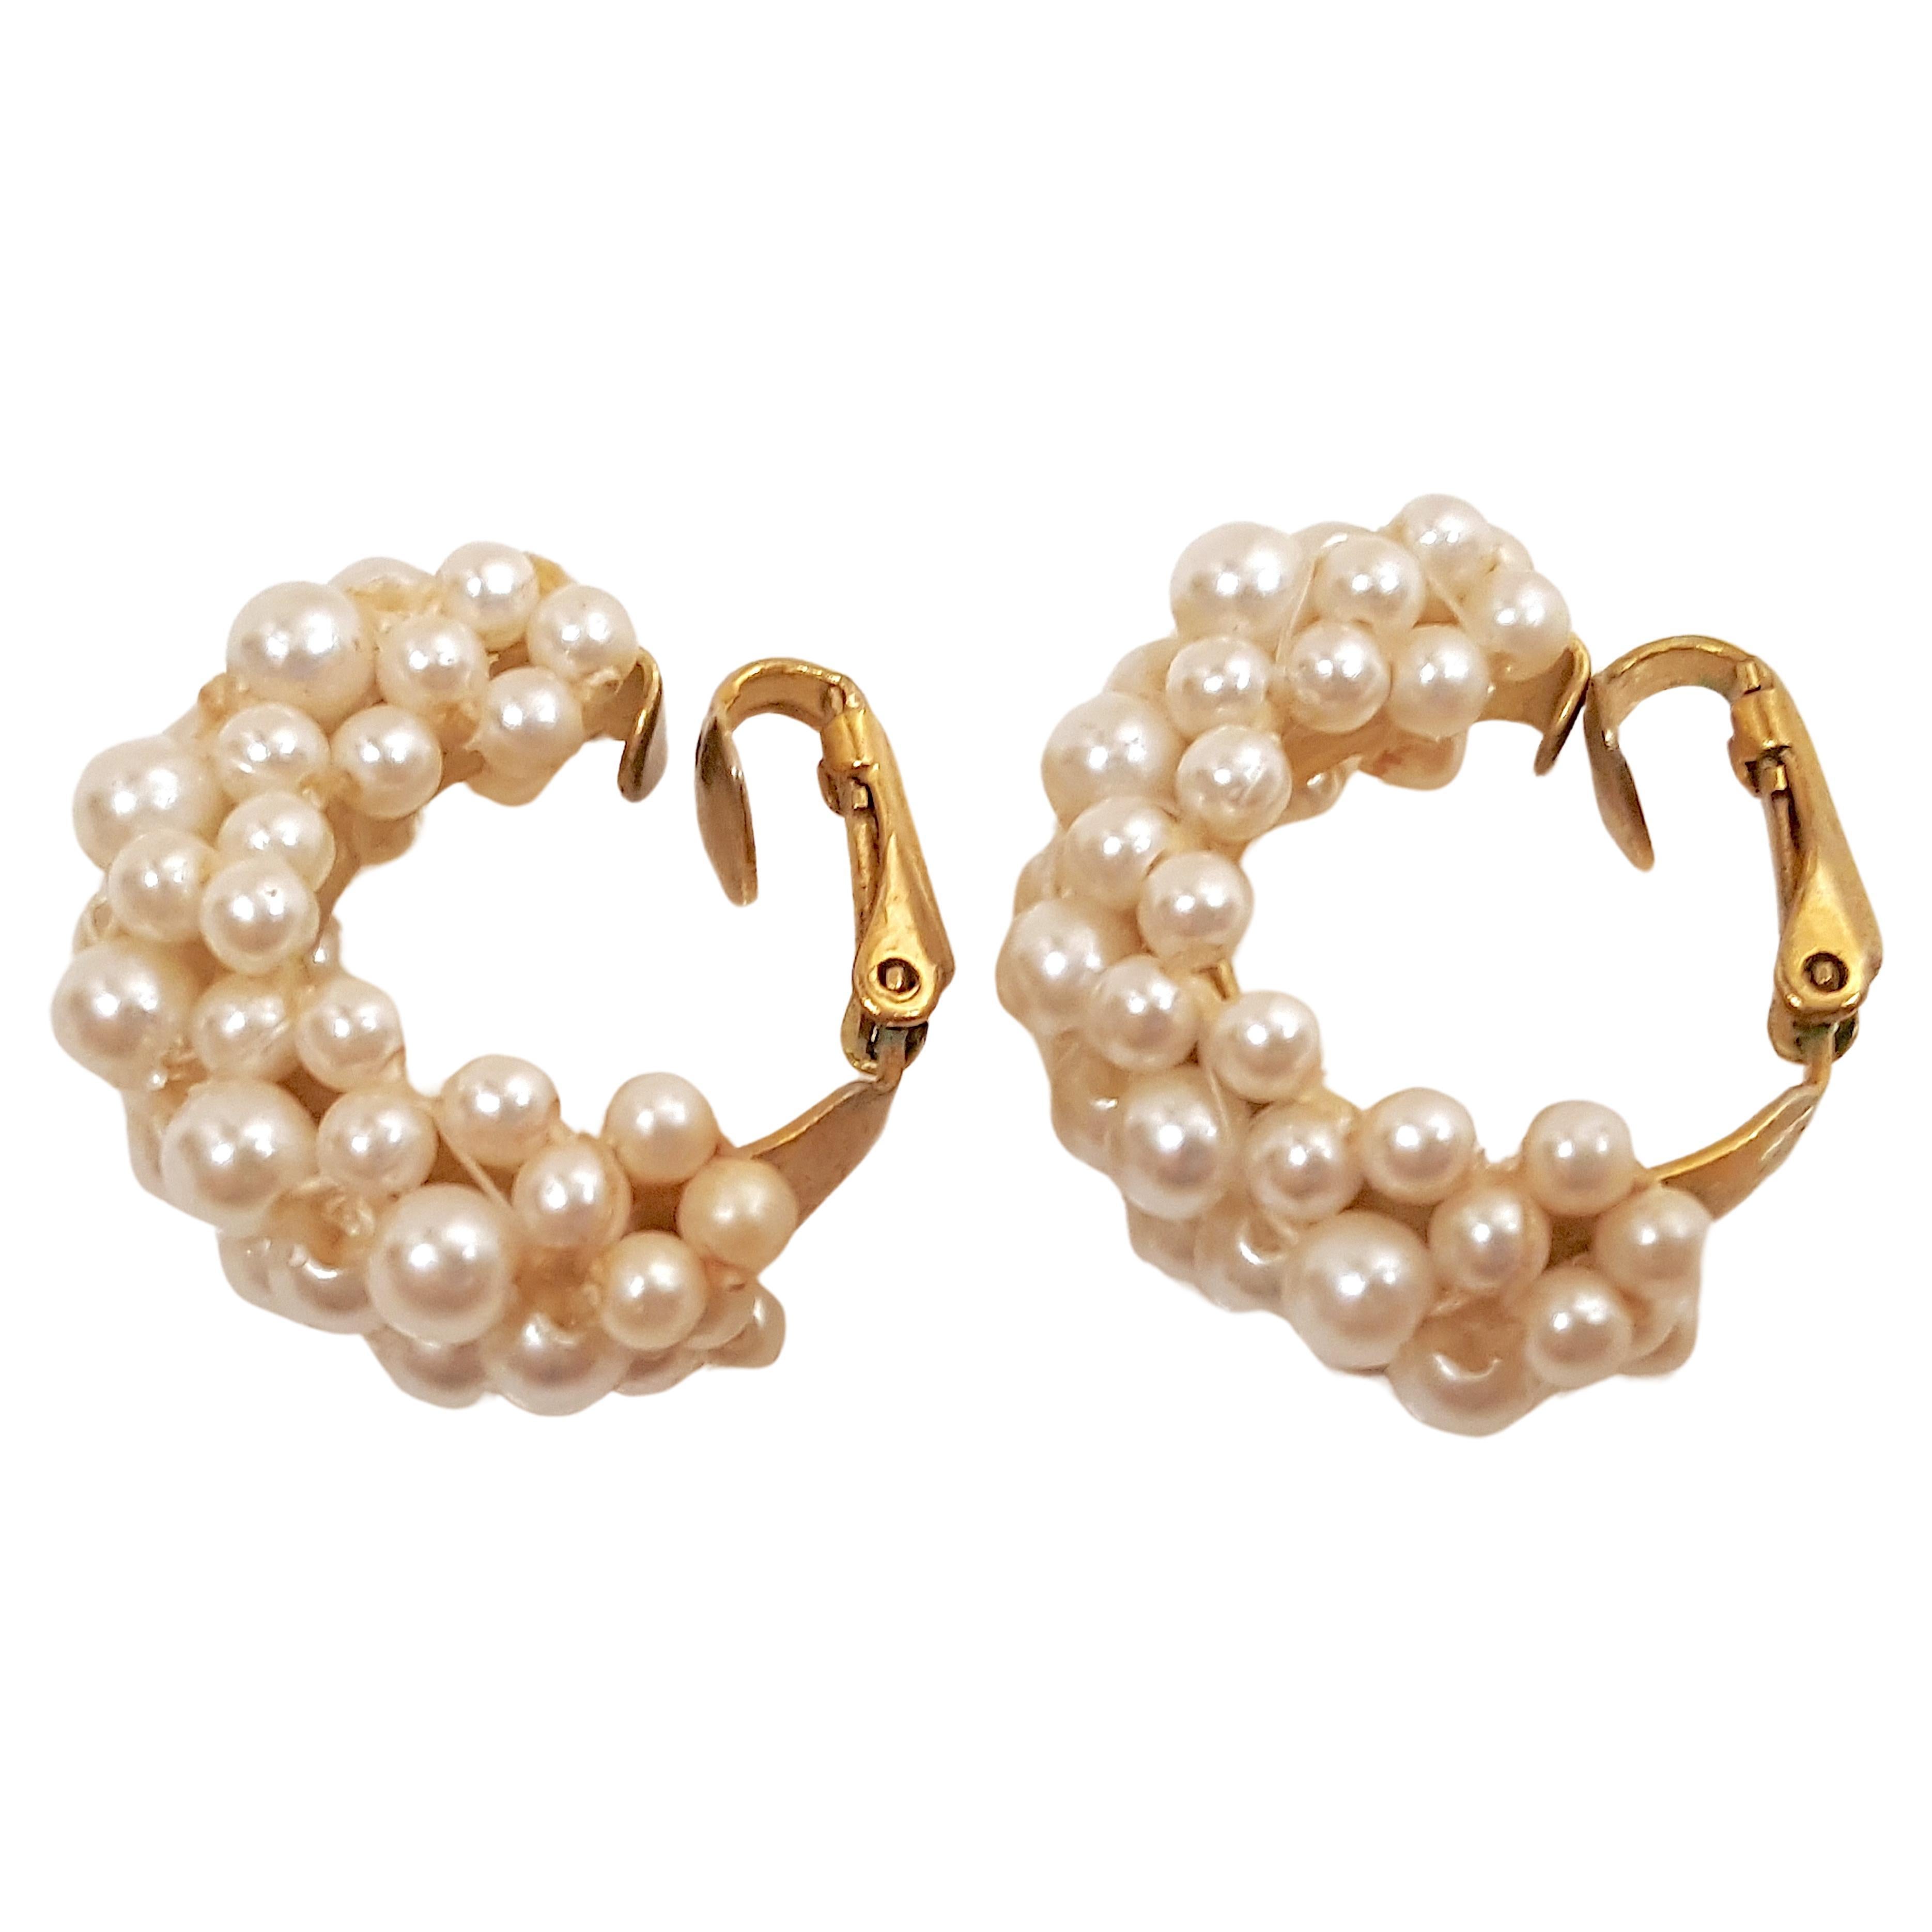 MiriamHaskell 1940s FrankHess Clustered FauxPearl YellowGold FrenchClip Earrings For Sale